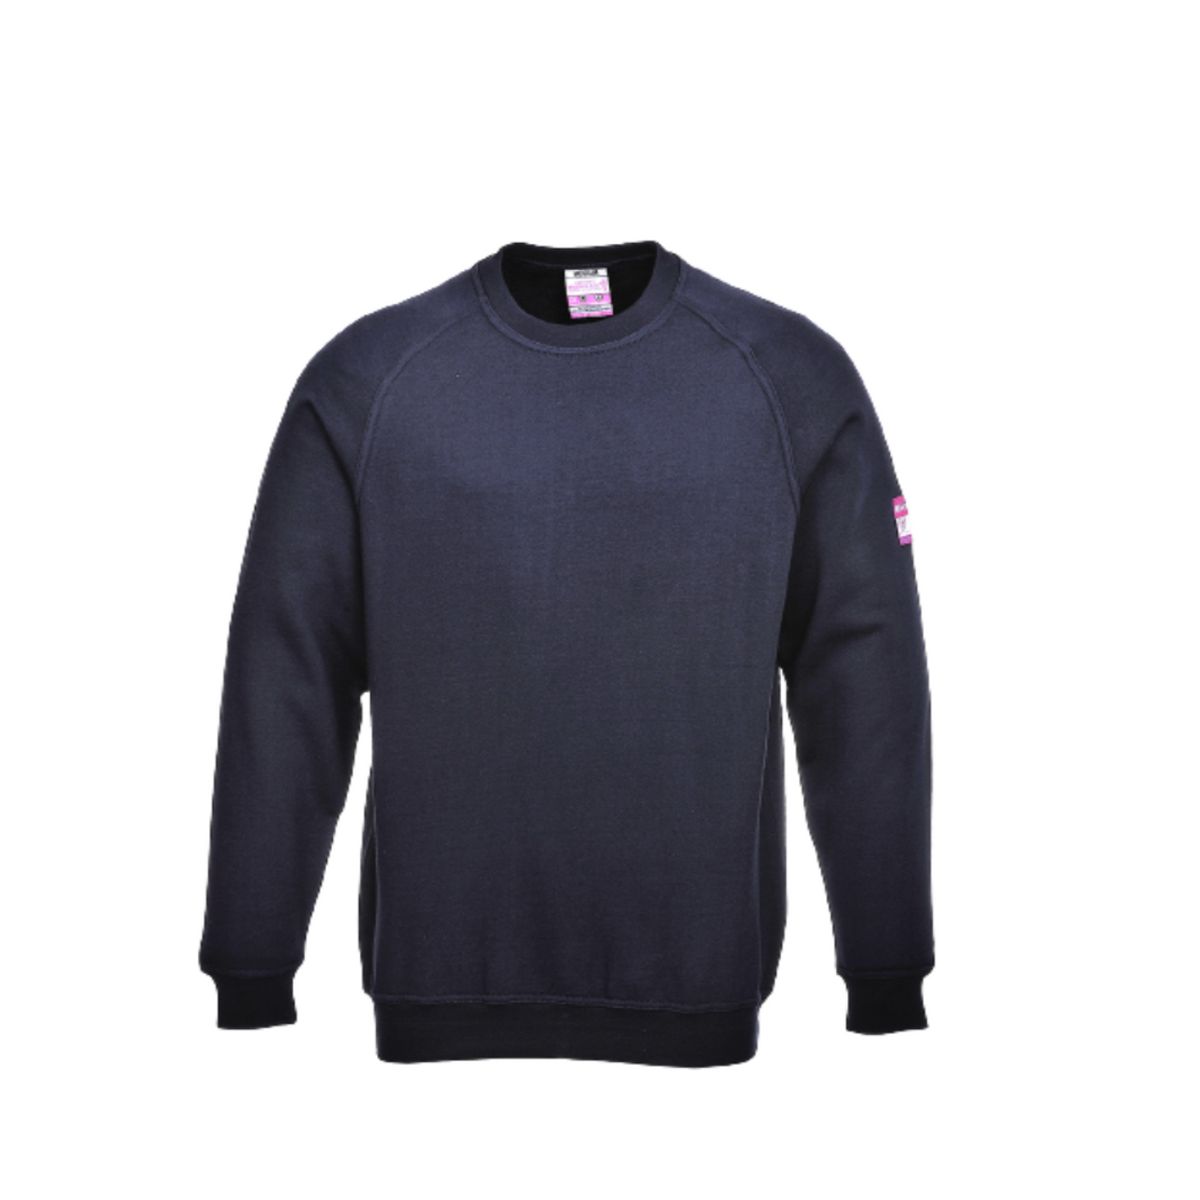 Portwest Flame Resistant Anti-Static Long Sleeve Brushed Fleece Crew Jumper FR12-Collins Clothing Co